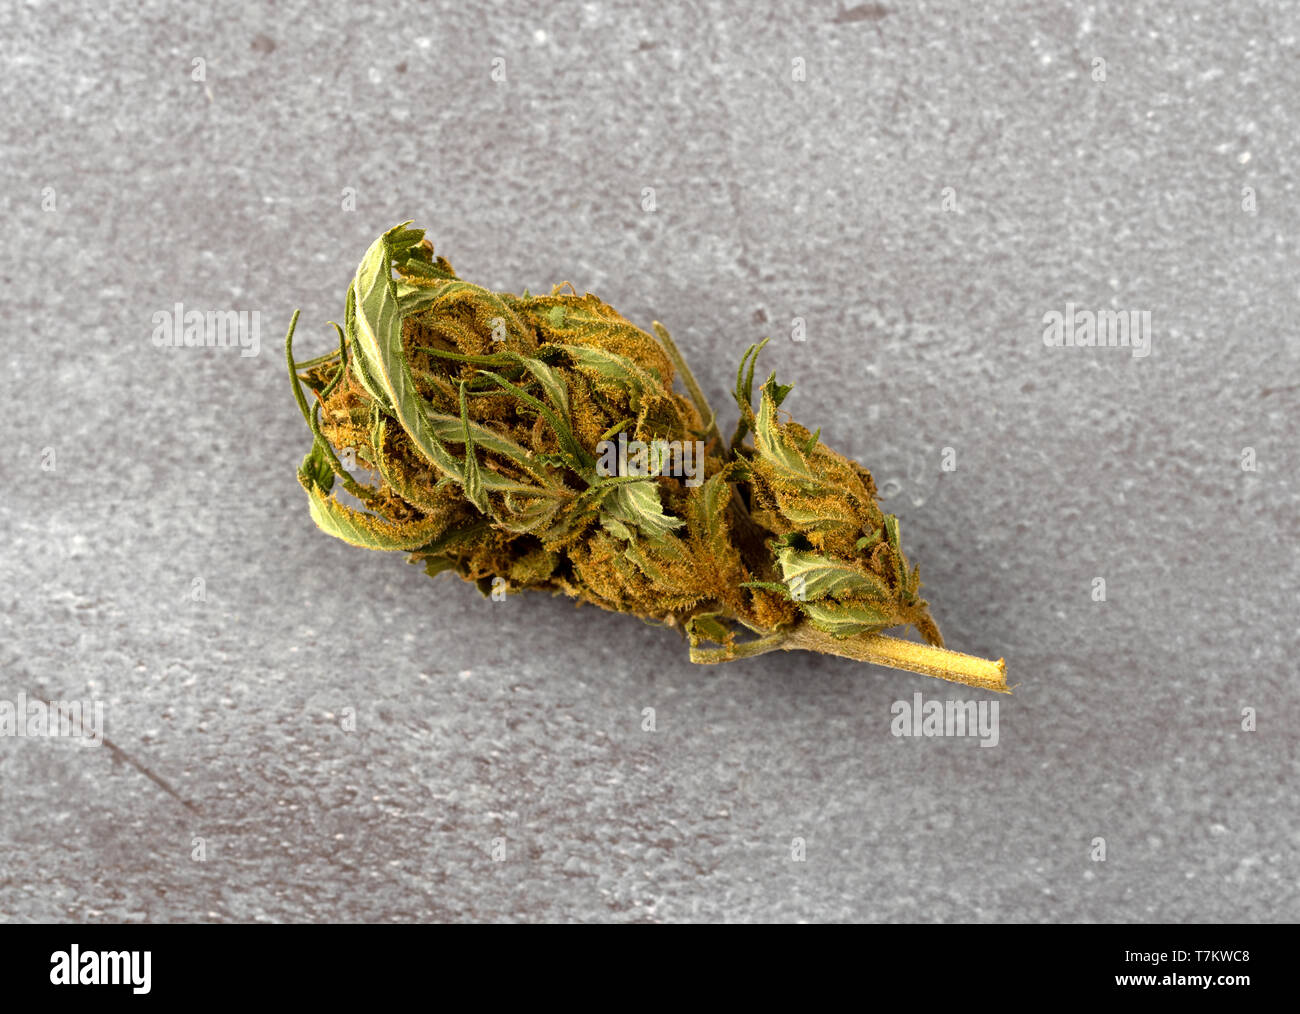 Top view of a marijuana bud on a gray table illuminated with natural light. Stock Photo